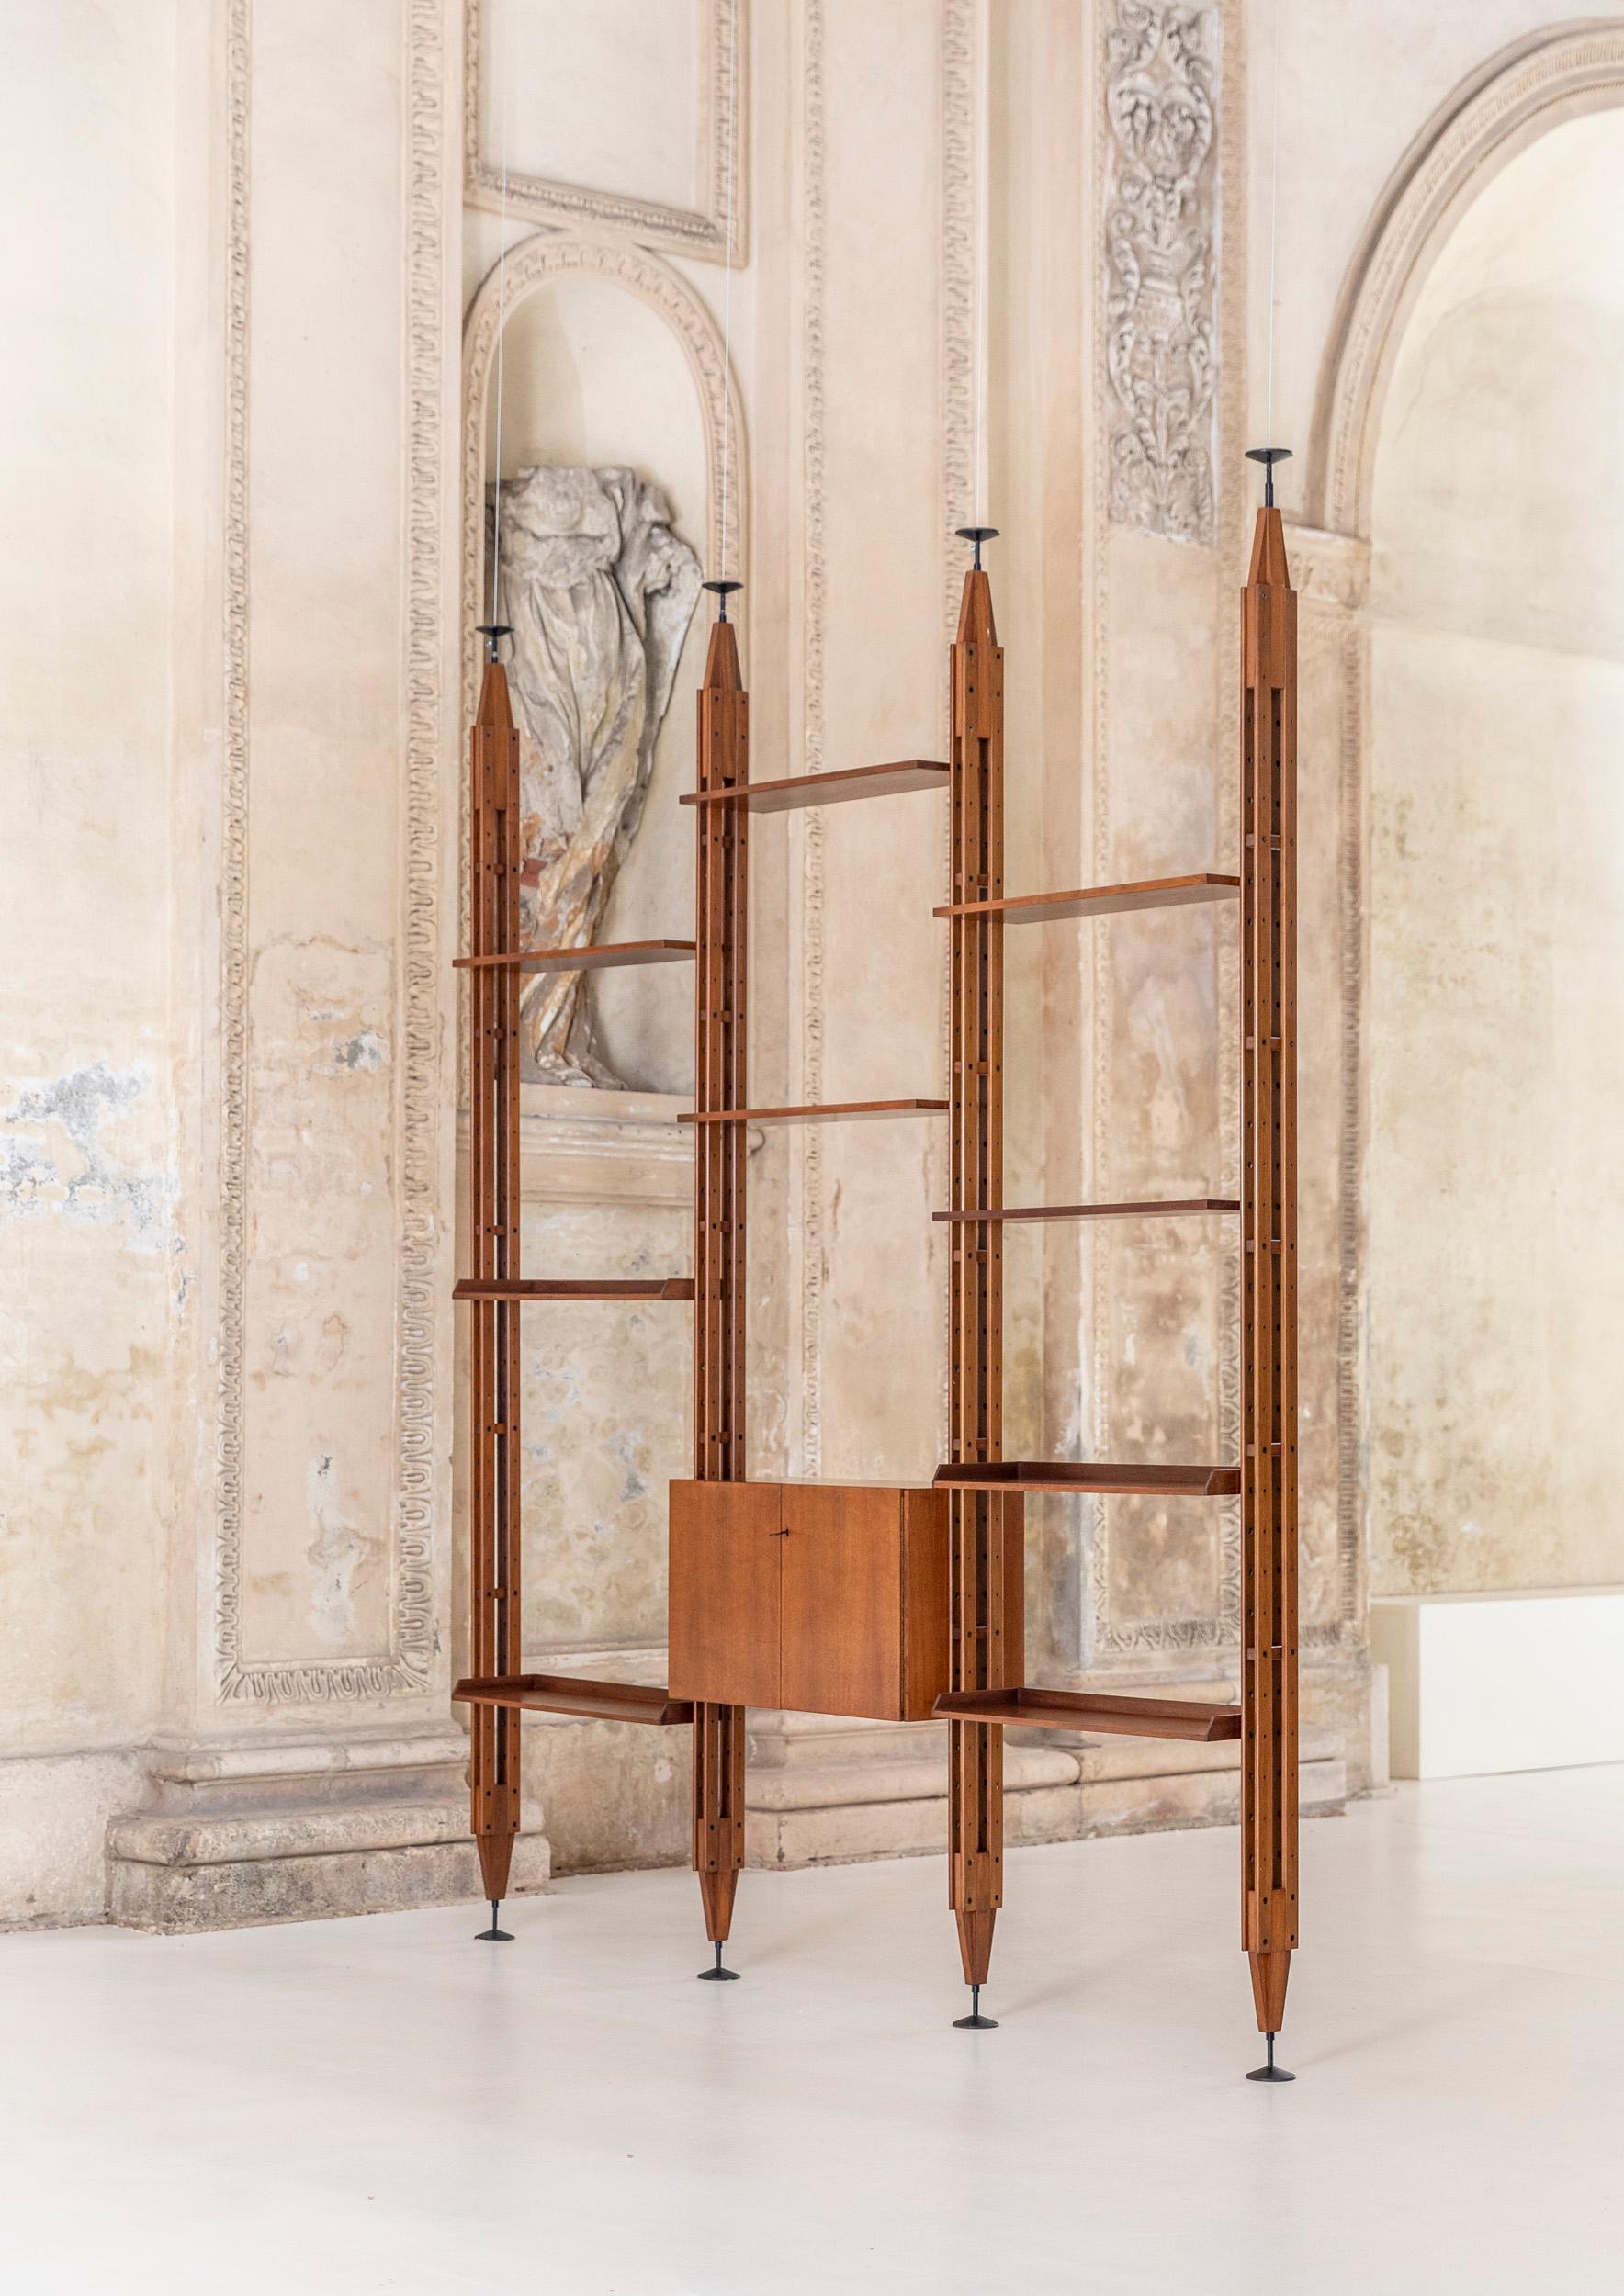 Modular bookcase designed by Franco Albini in 1956 for Poggi Pavia.
An extremely flexible bookcase, with different modular options, suited to being against a wall or as a room partition. Franco Albini designed this piece in 1956 using a solid wood